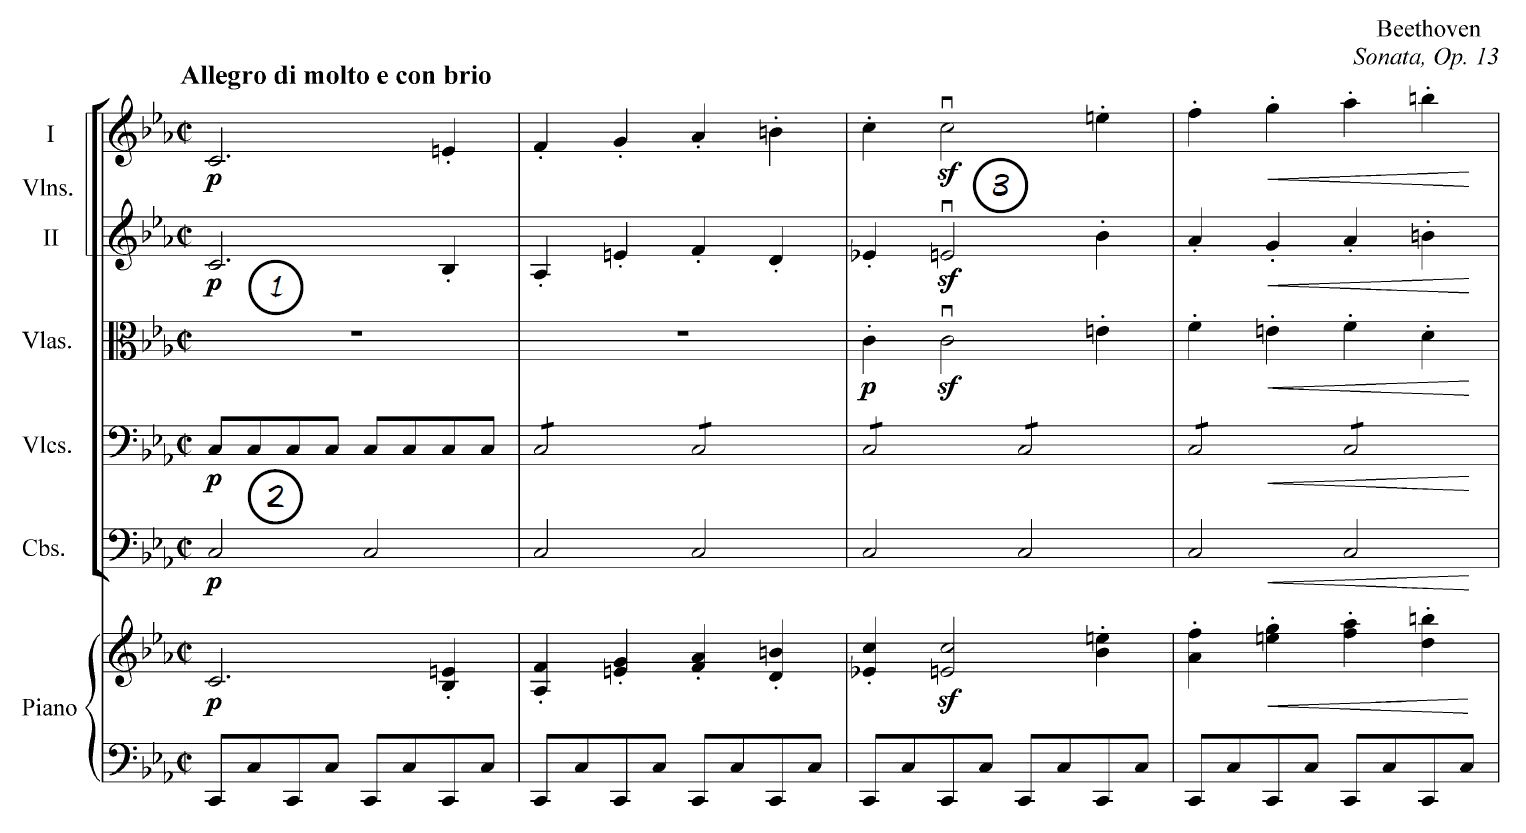 Score example from the book A Practical Handbook: From Piano to Strings